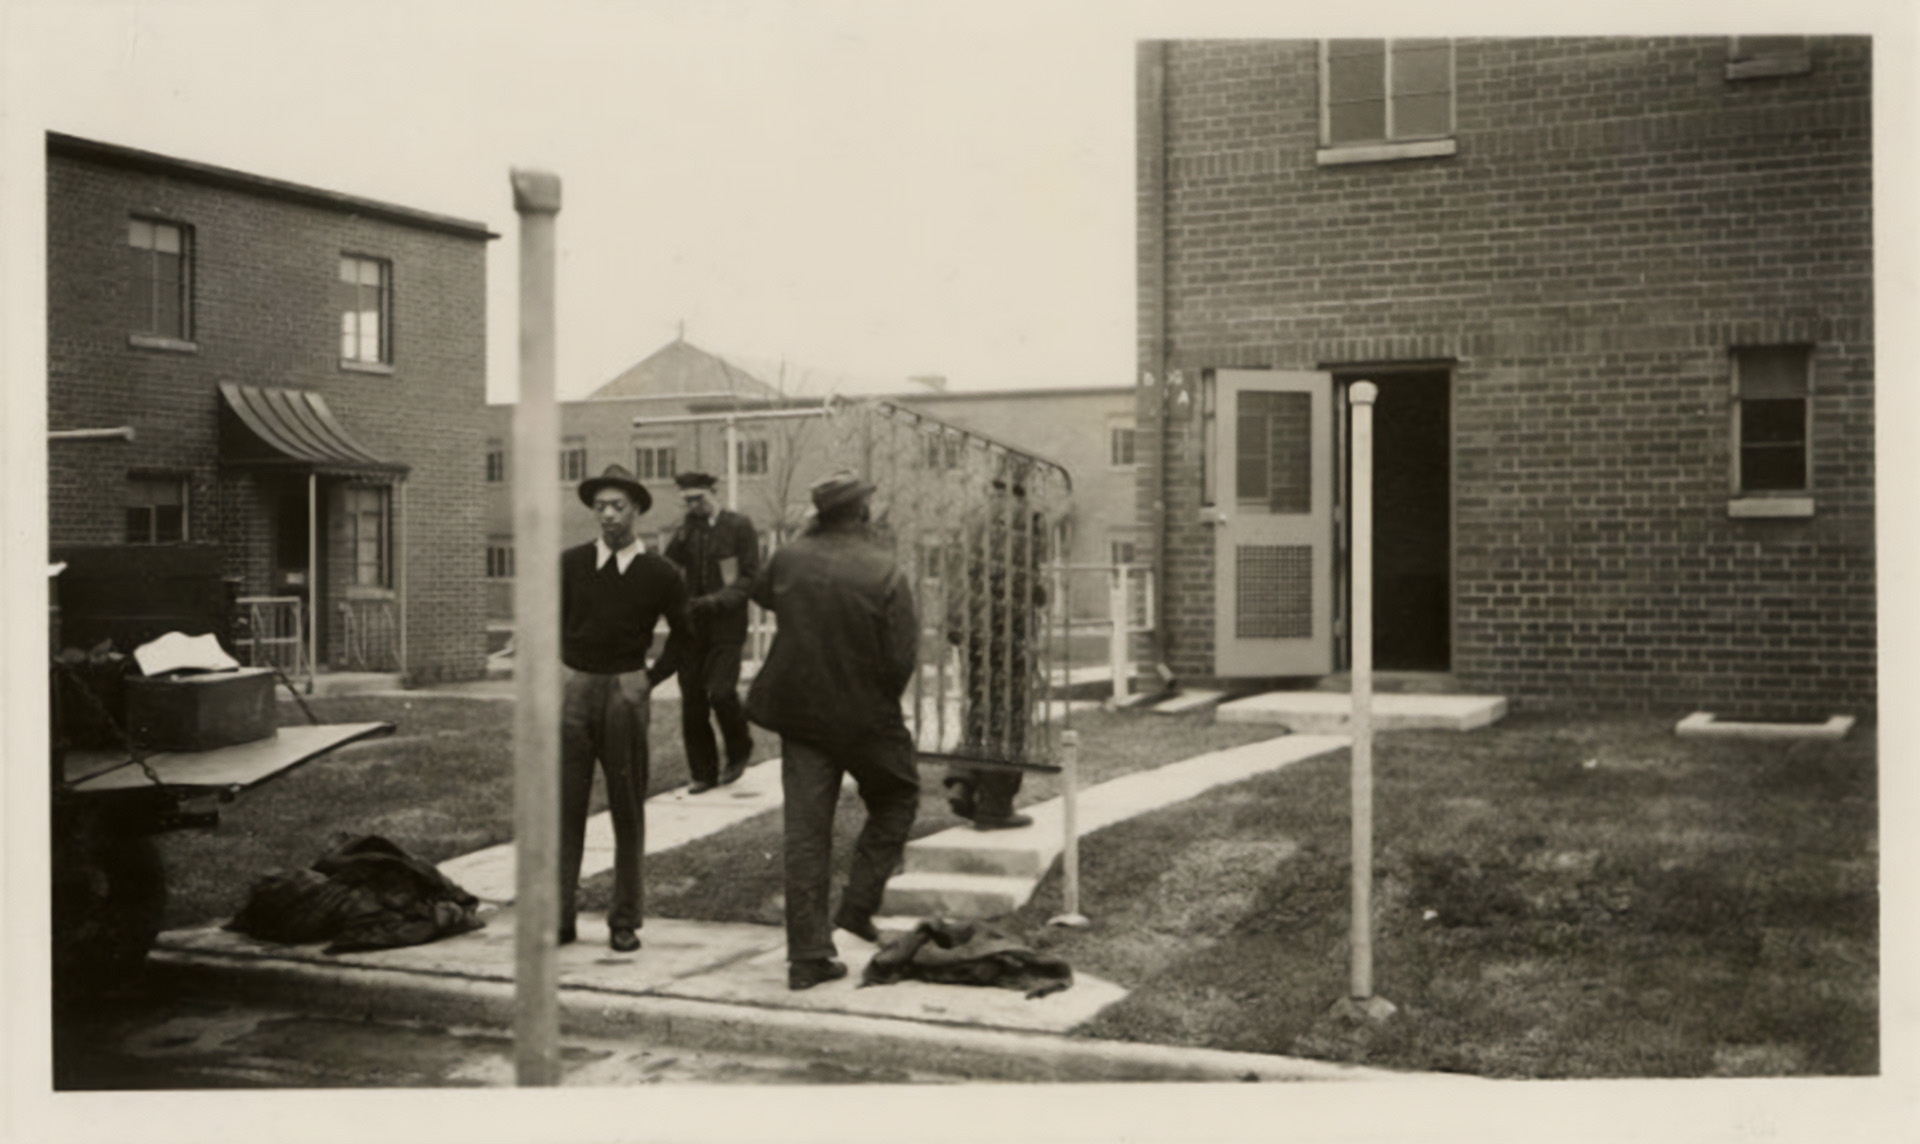 Dated May 13, 1940, this photograph shows two men carrying a metal fixture into one of the units at Poindexter Village in Columbus, Ohio.